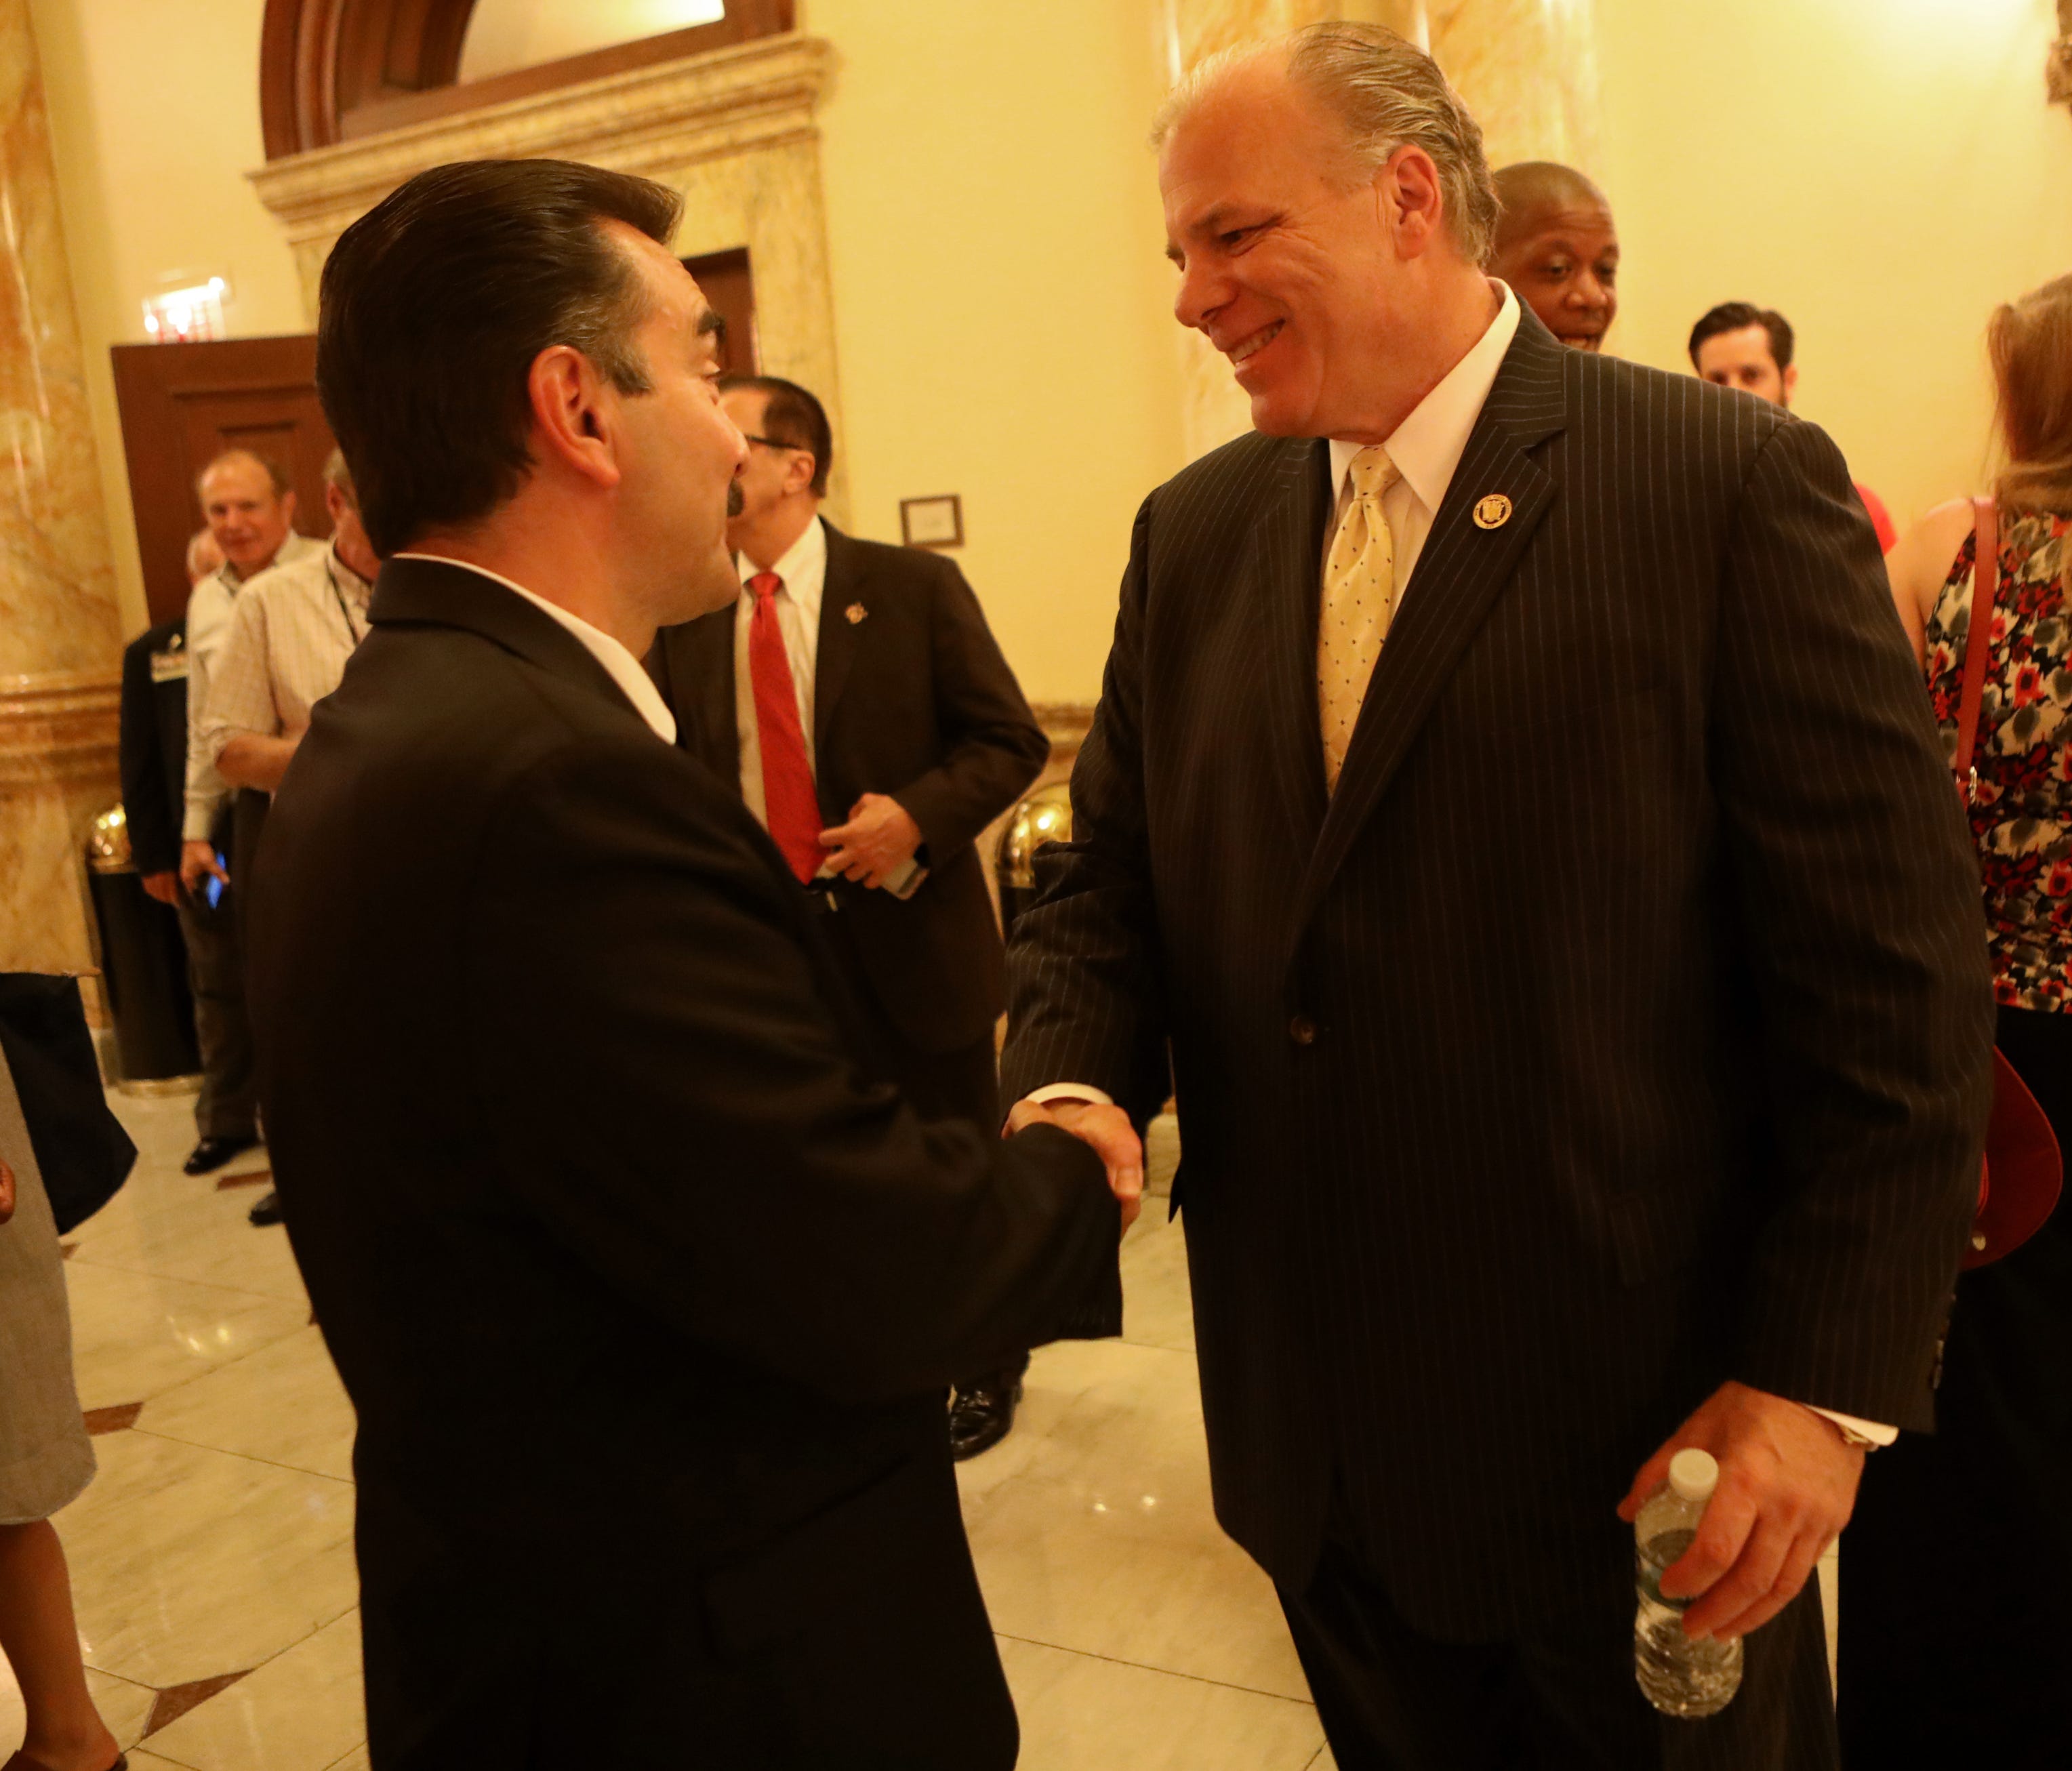 Senate President, Stephen Sweeney and Assembly President, Vincent Prieto shake hands after announcing a budget deal was reached. Monday July 3, 2017.